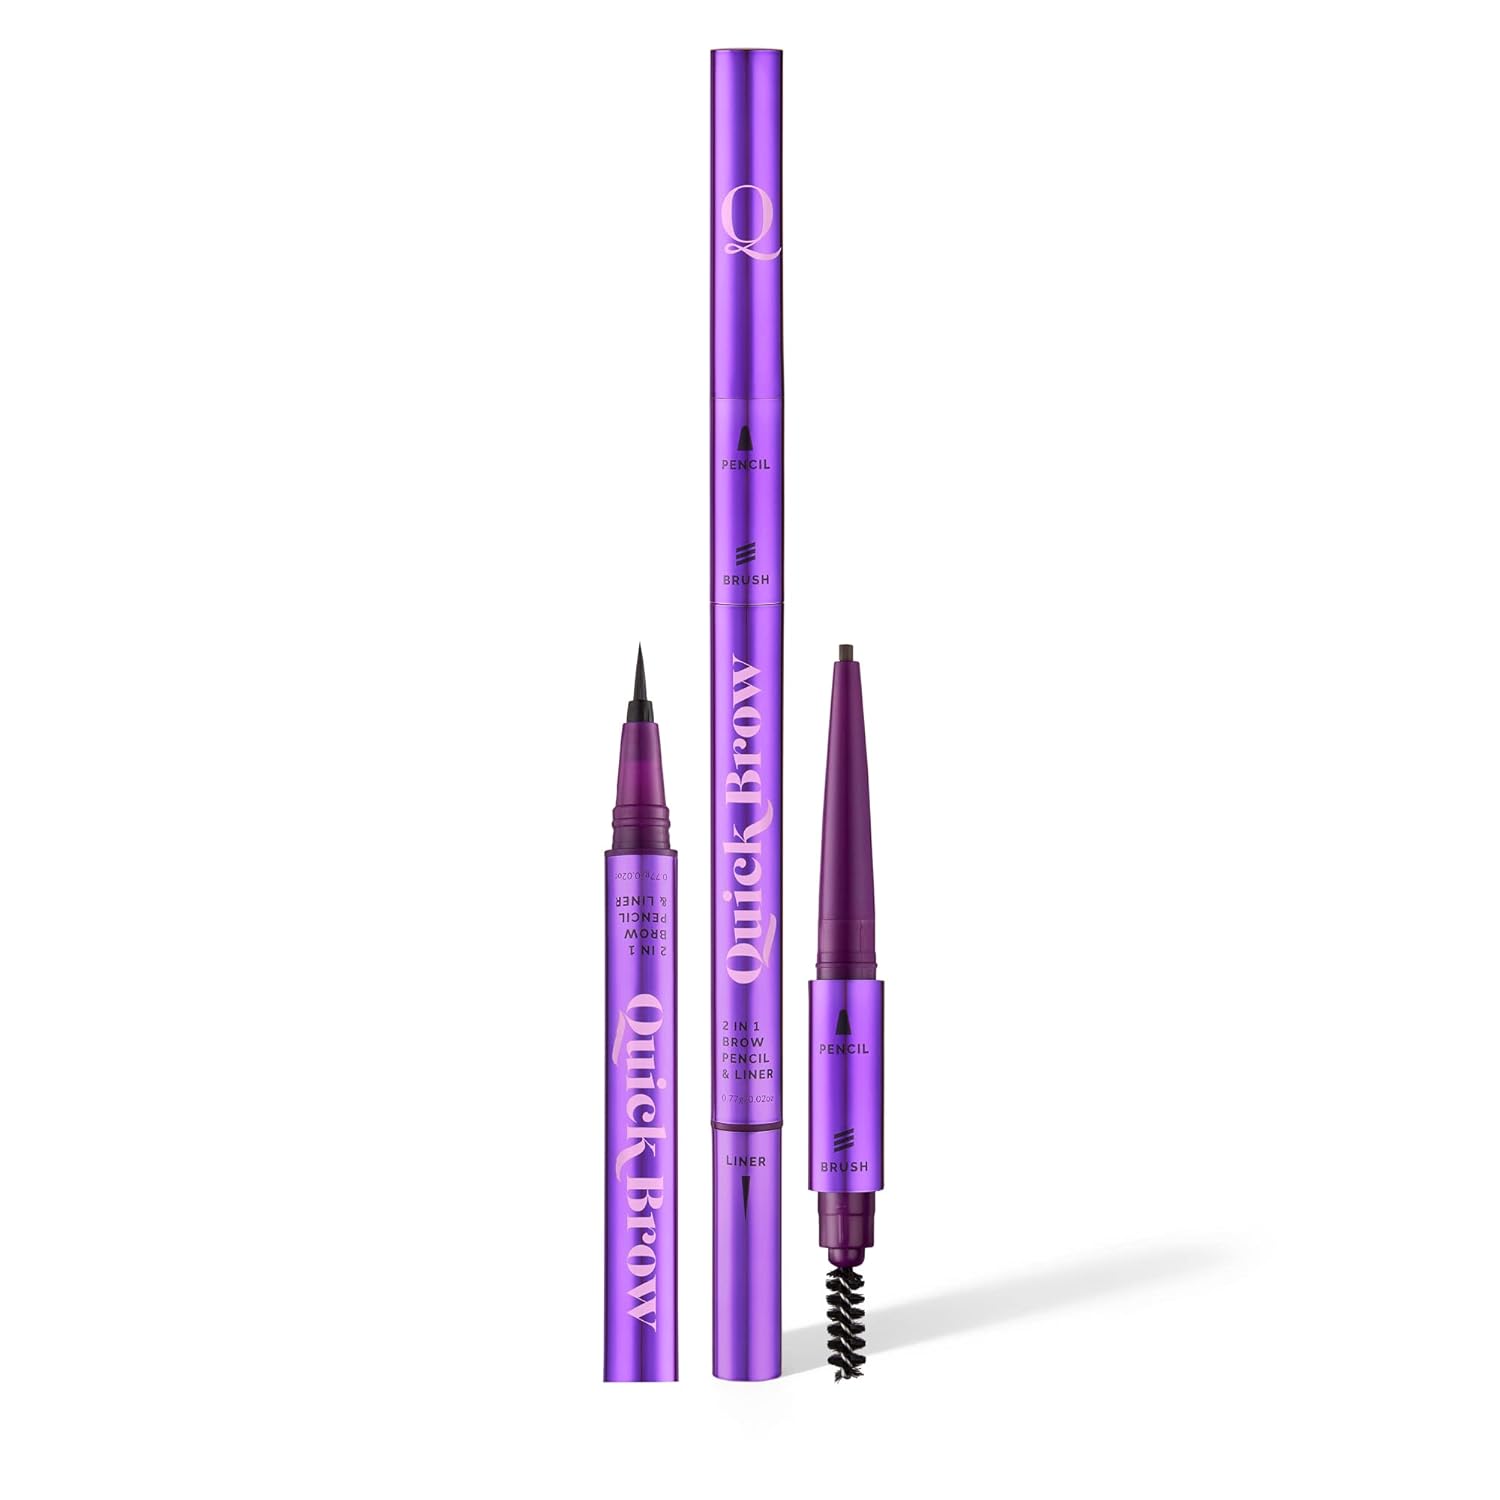 The Quick ick - Quick Brow 2 in 1 Brow Pencil and Liner - Dark